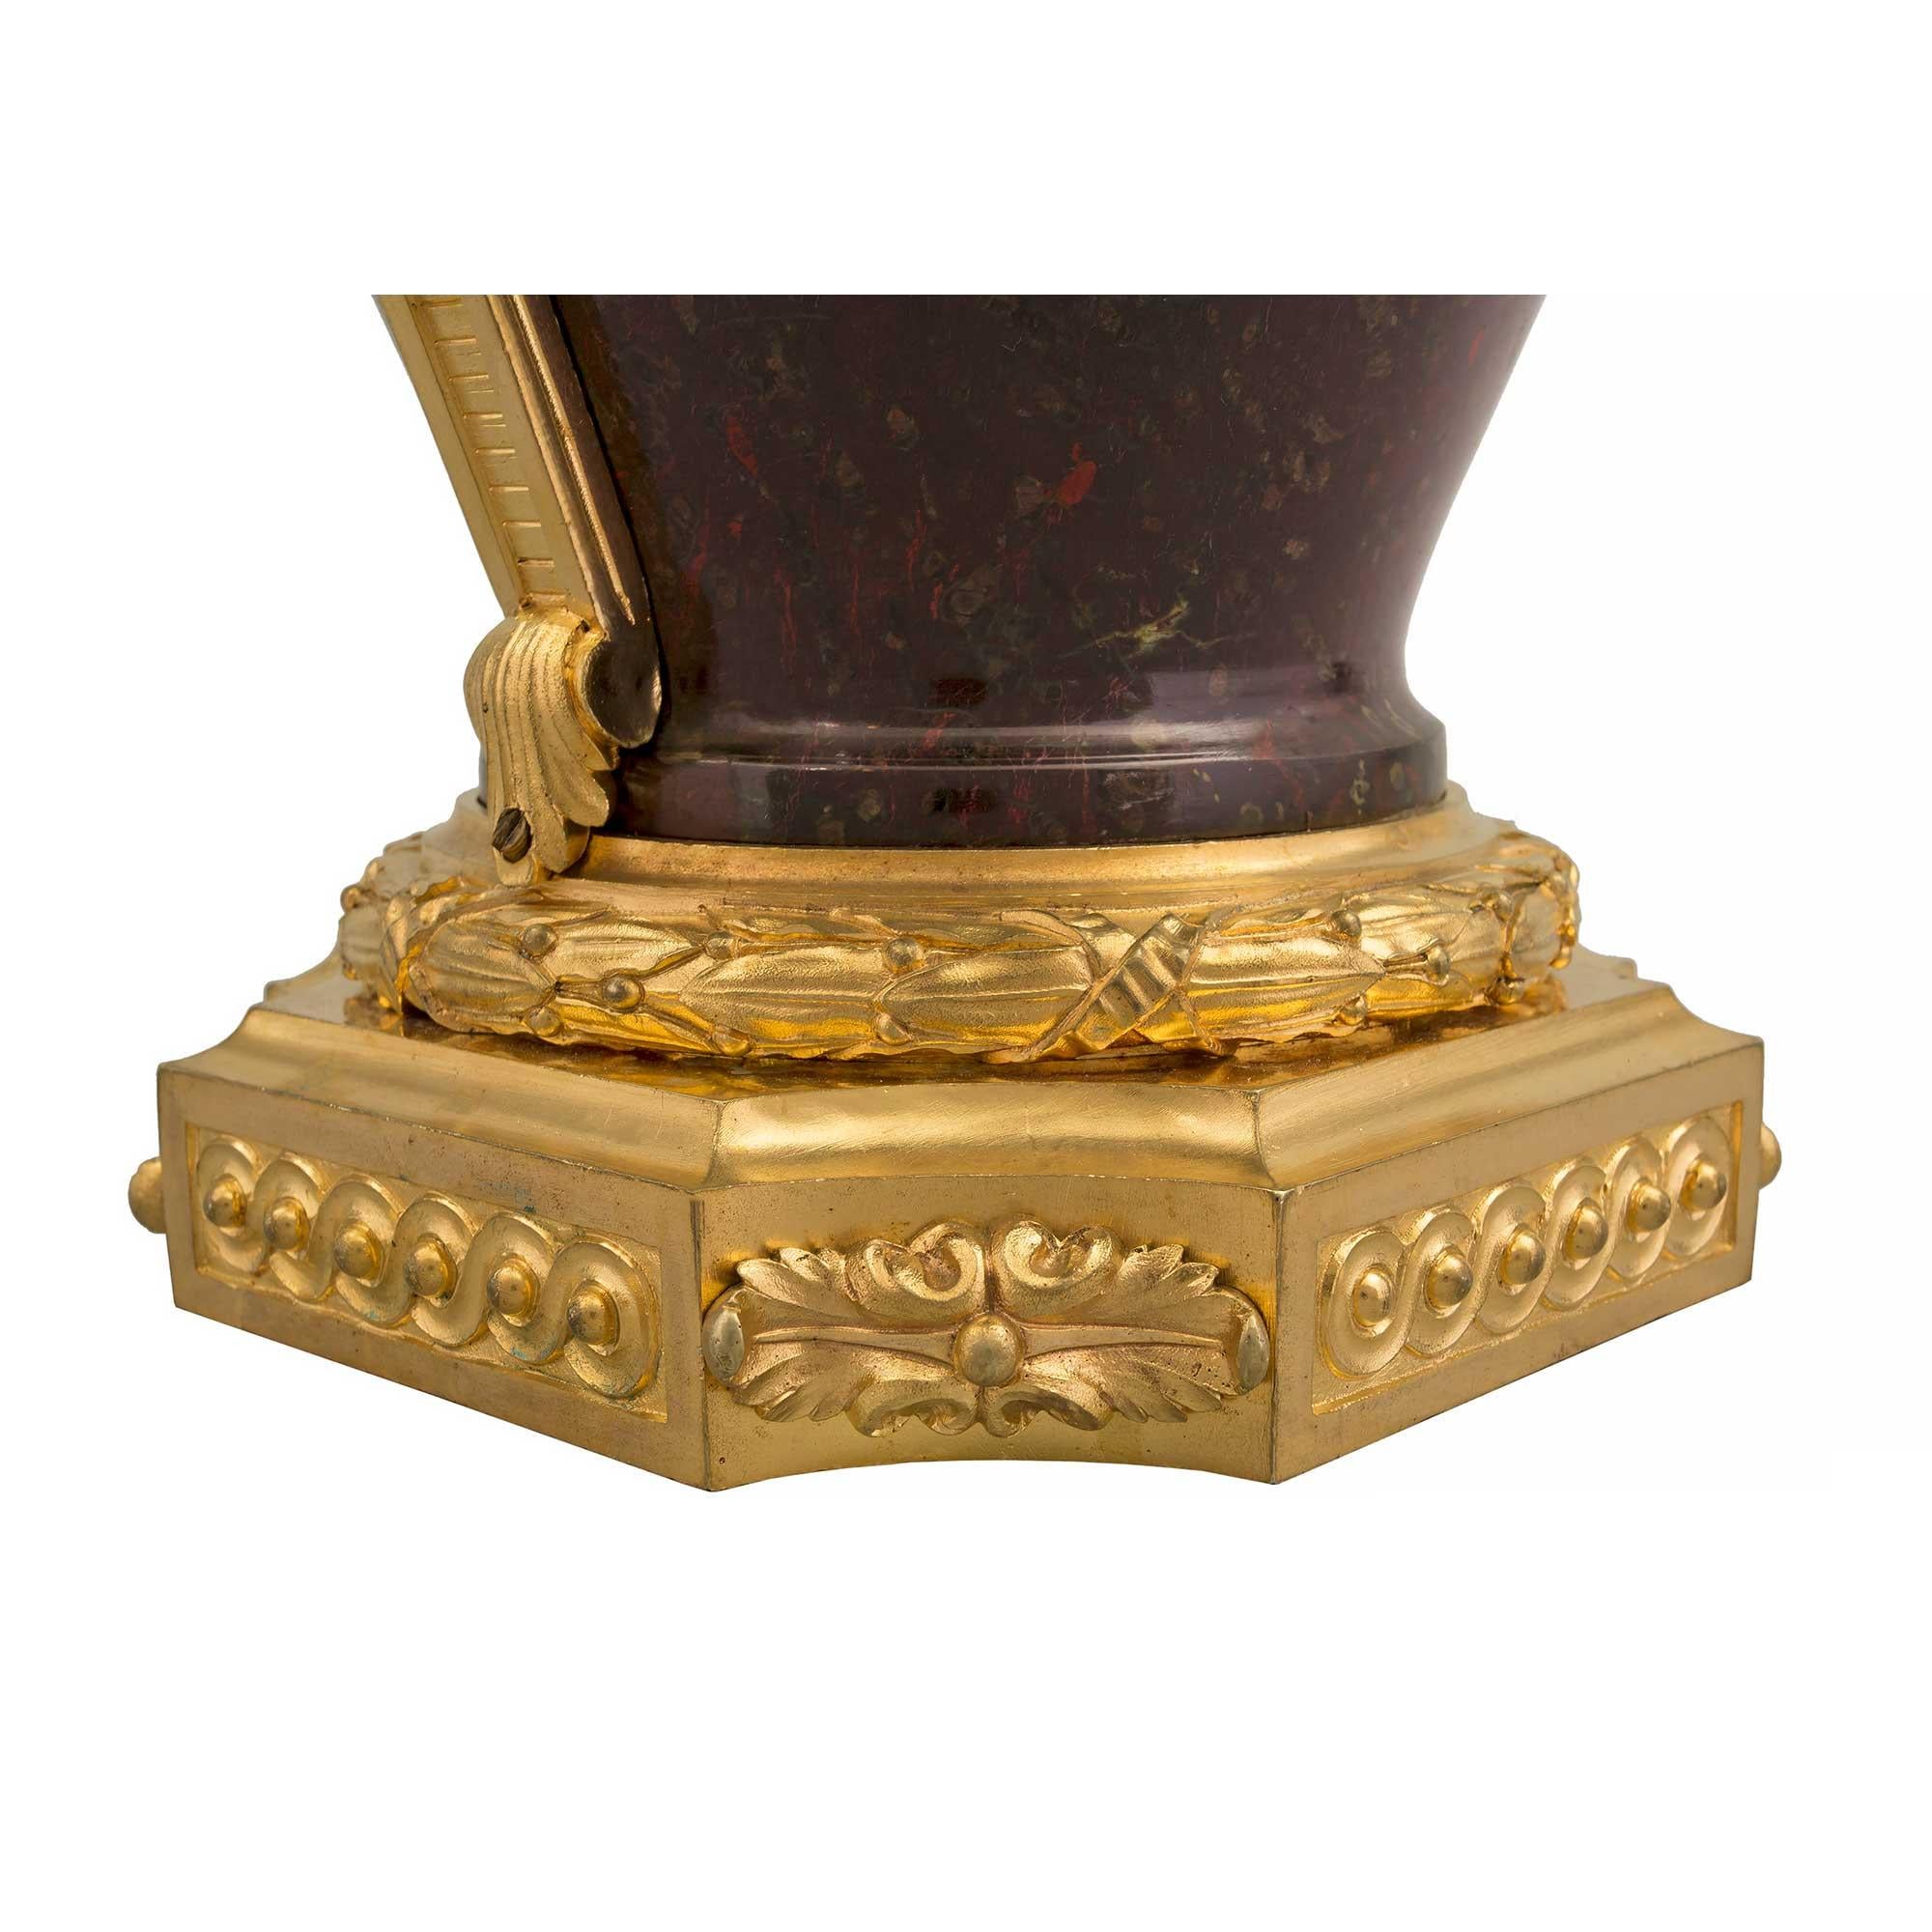 French Early 19th Century Louis XVI Style Porphyry and Ormolu Urns For Sale 6